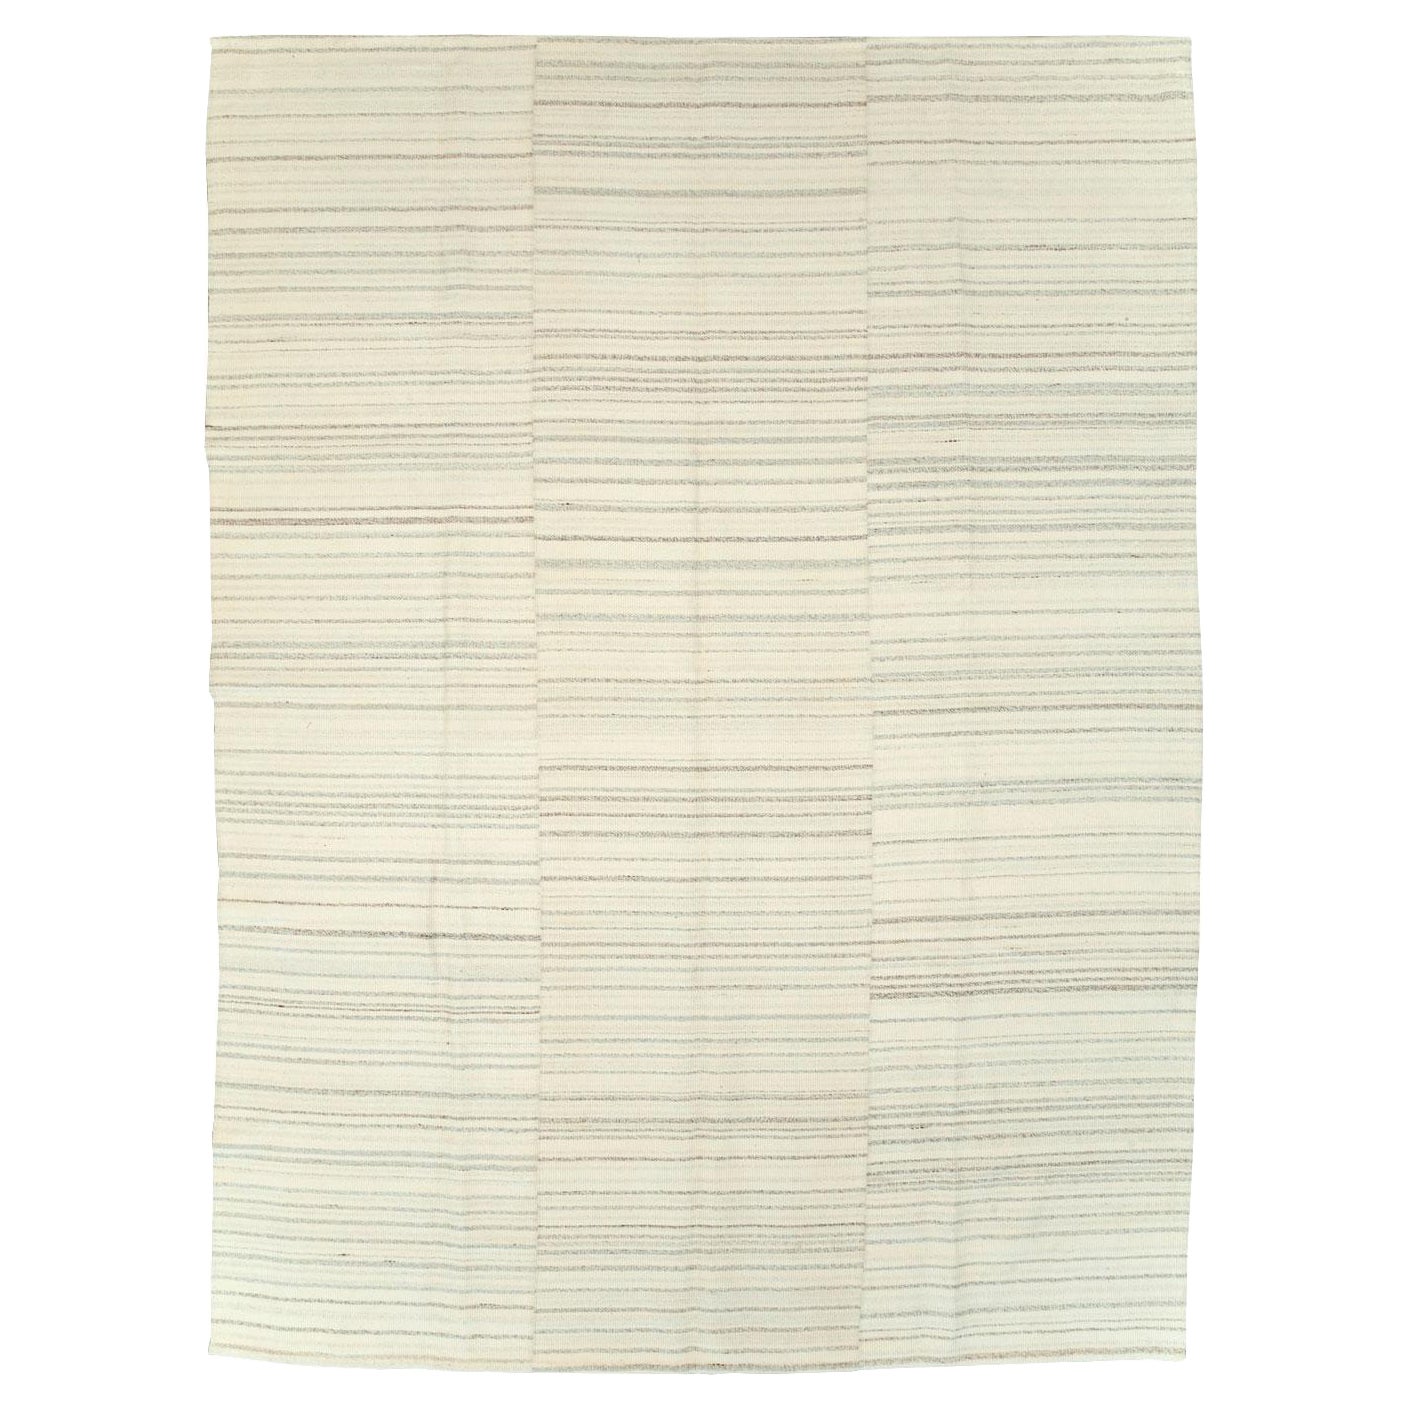 Contemporary Turkish Flatweave Kilim Room Size Carpet In Beige For Sale